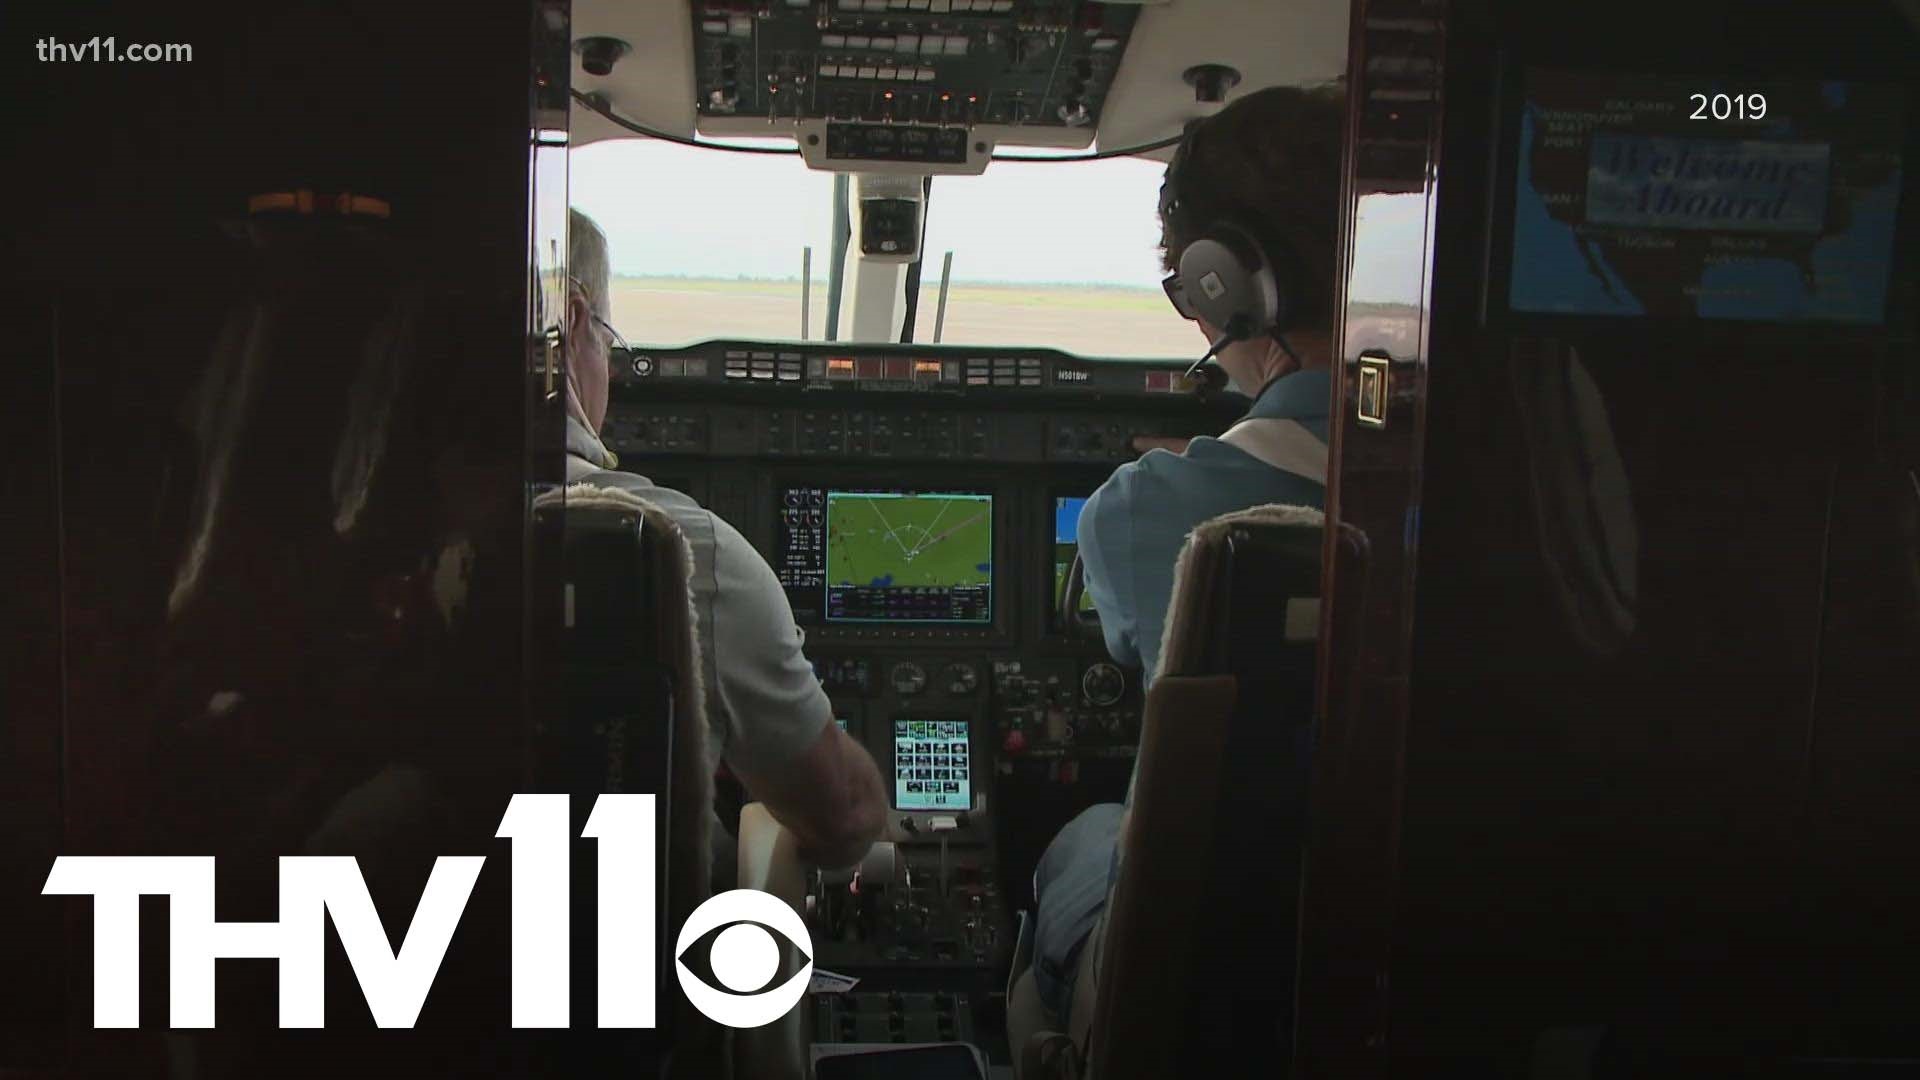 Following the tragic plane crash in Little Rock, many might feel anxiety around flying. Experts and a 1999 crash survivor share tips to overcome the fear.